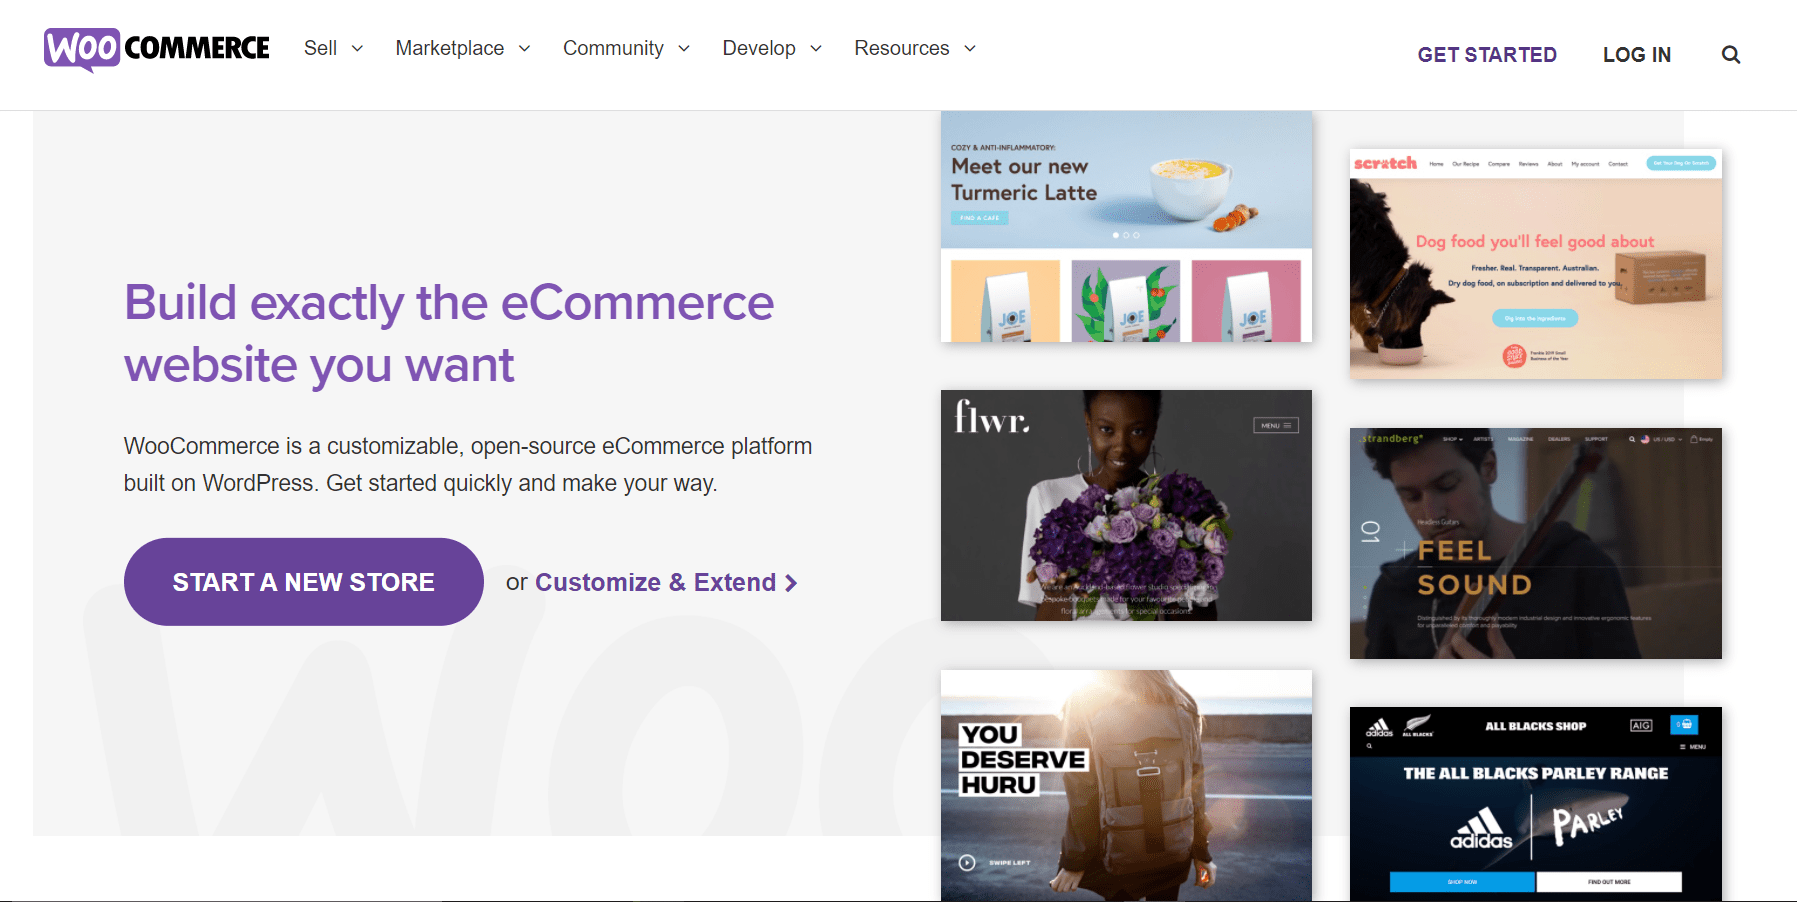 Woocommerce Overview